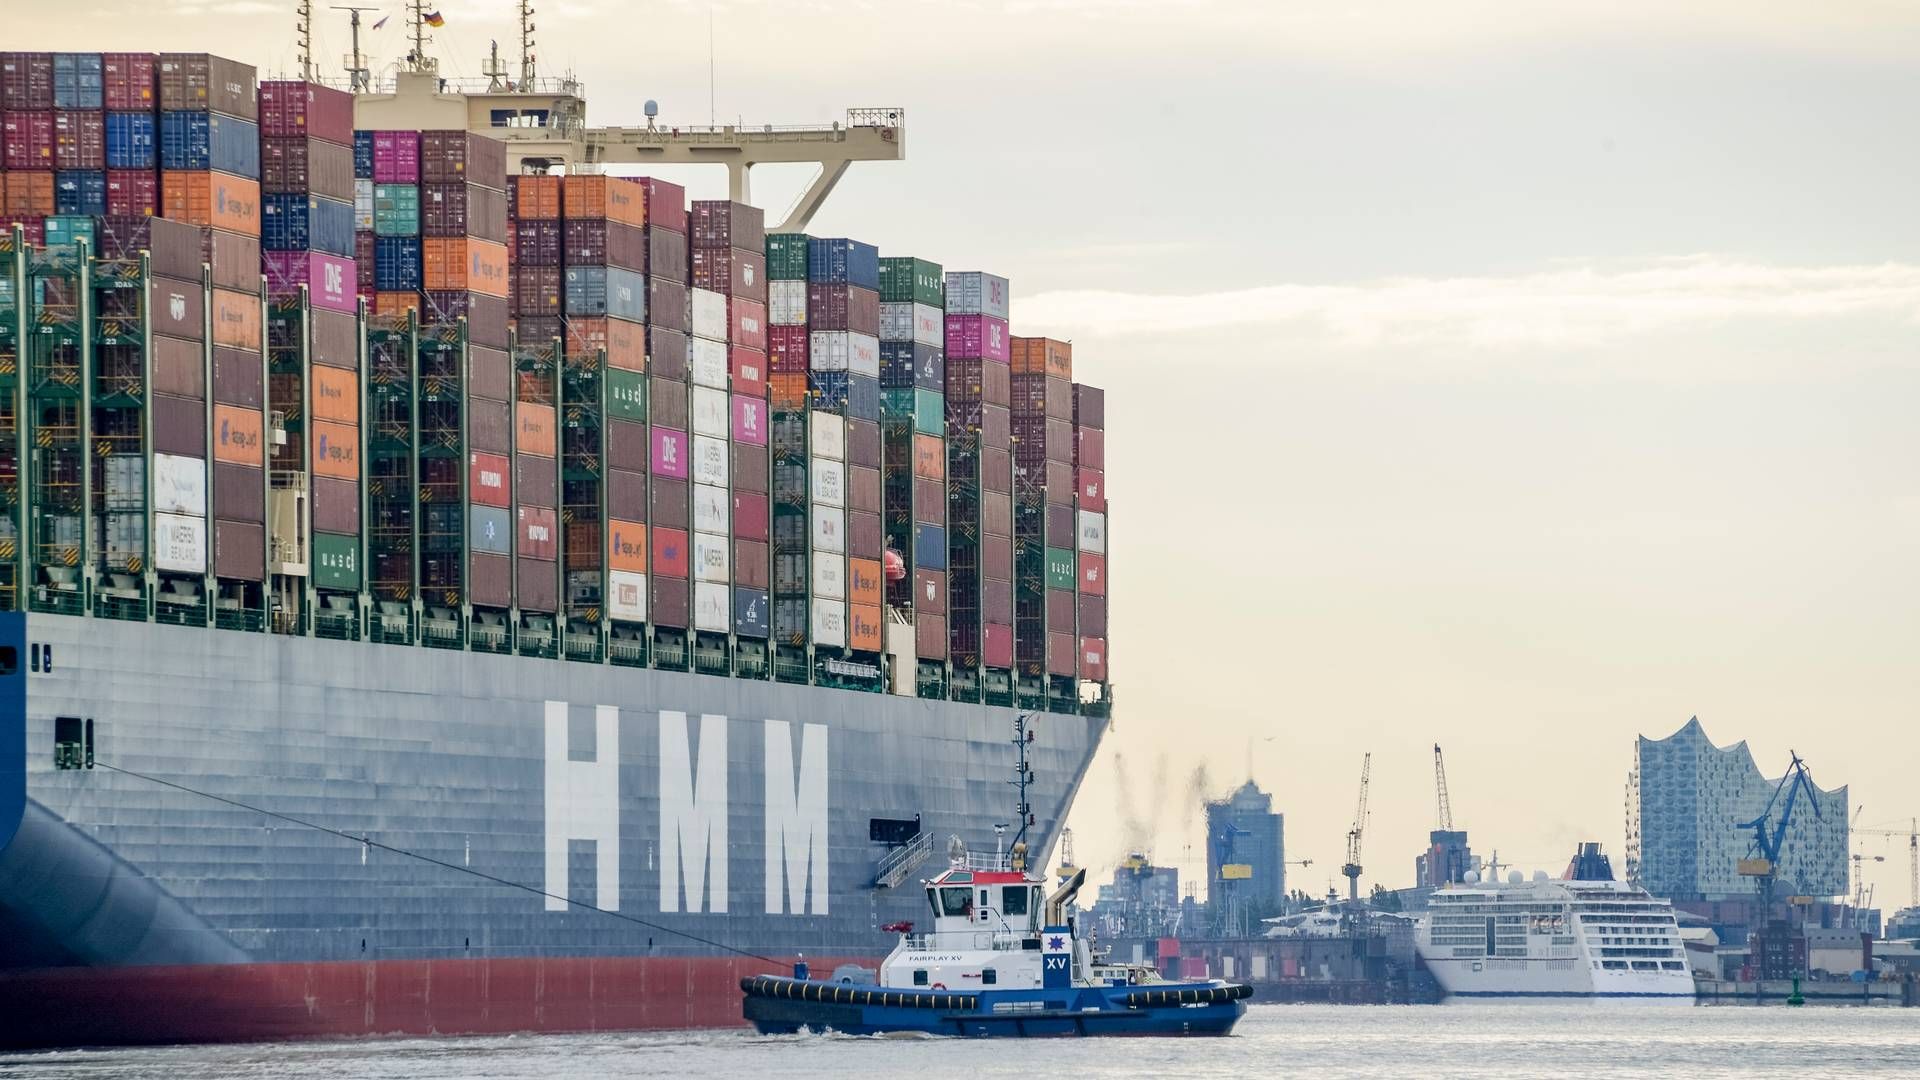 If companies replace large container ships - like one of HMM's - with smaller vessels to transport their goods, it can contribute to a significant increase in carbon footprint.